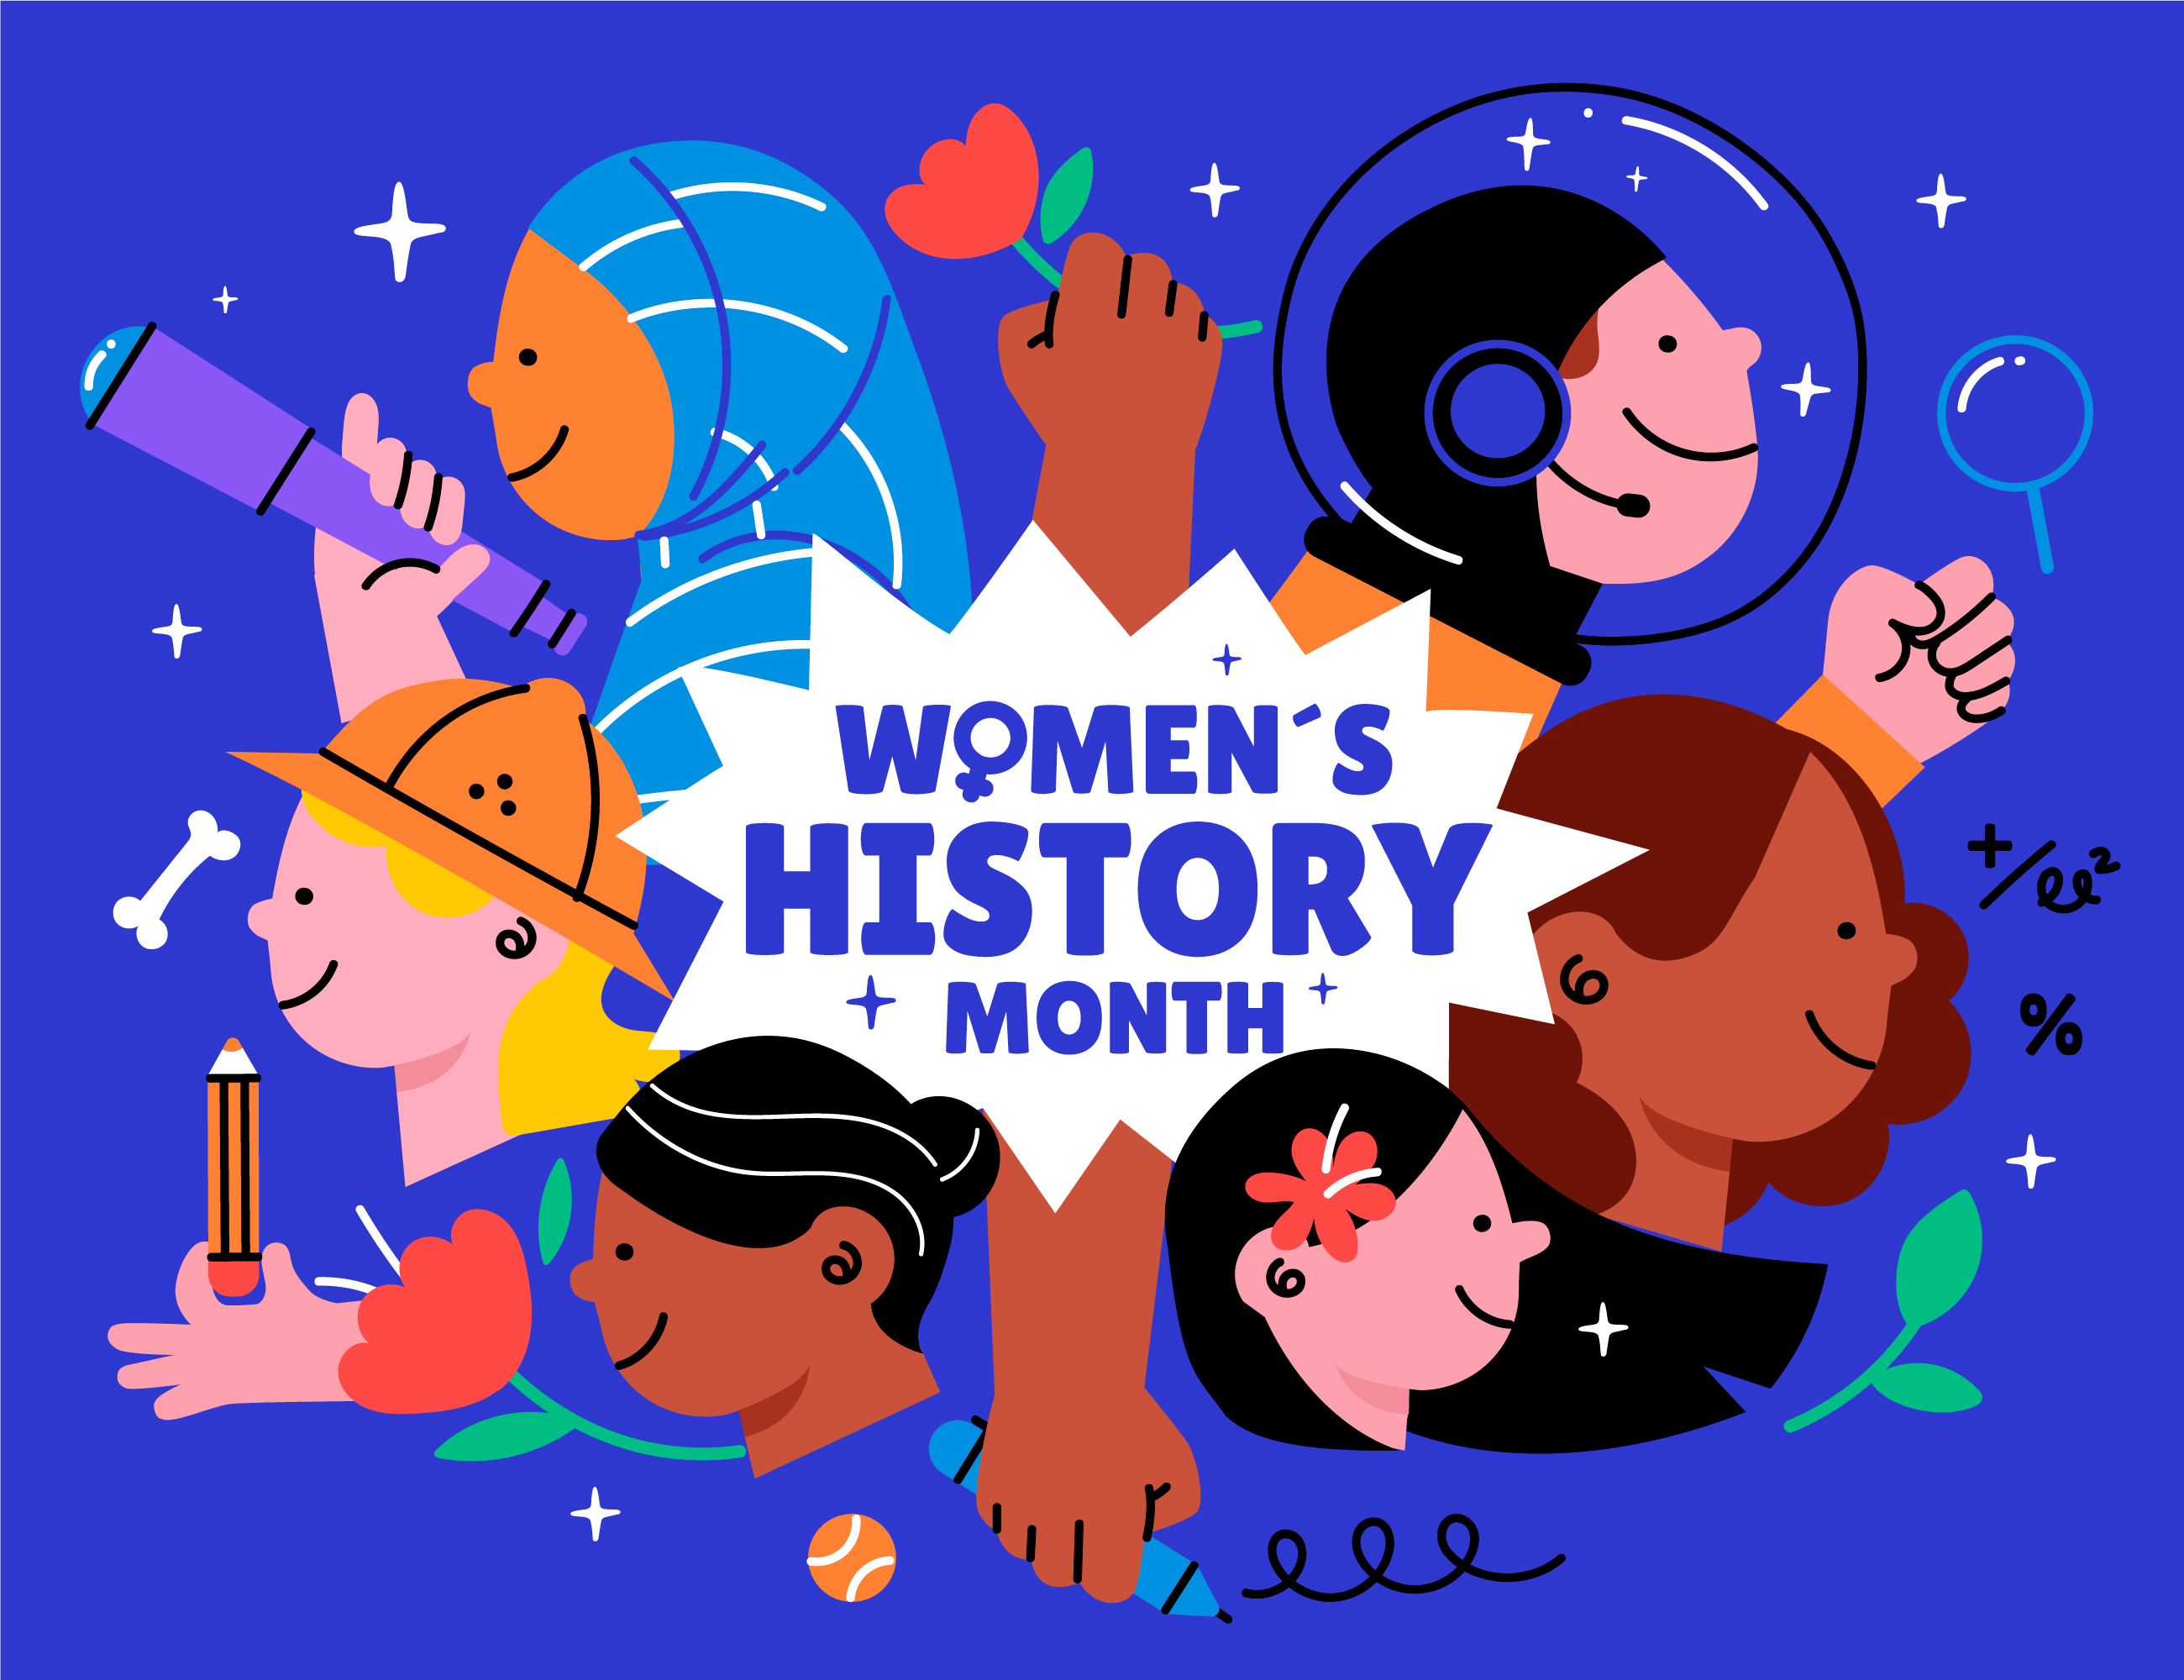 Illustration of diverse women against a blue background.  Text reads "Women's History Month"